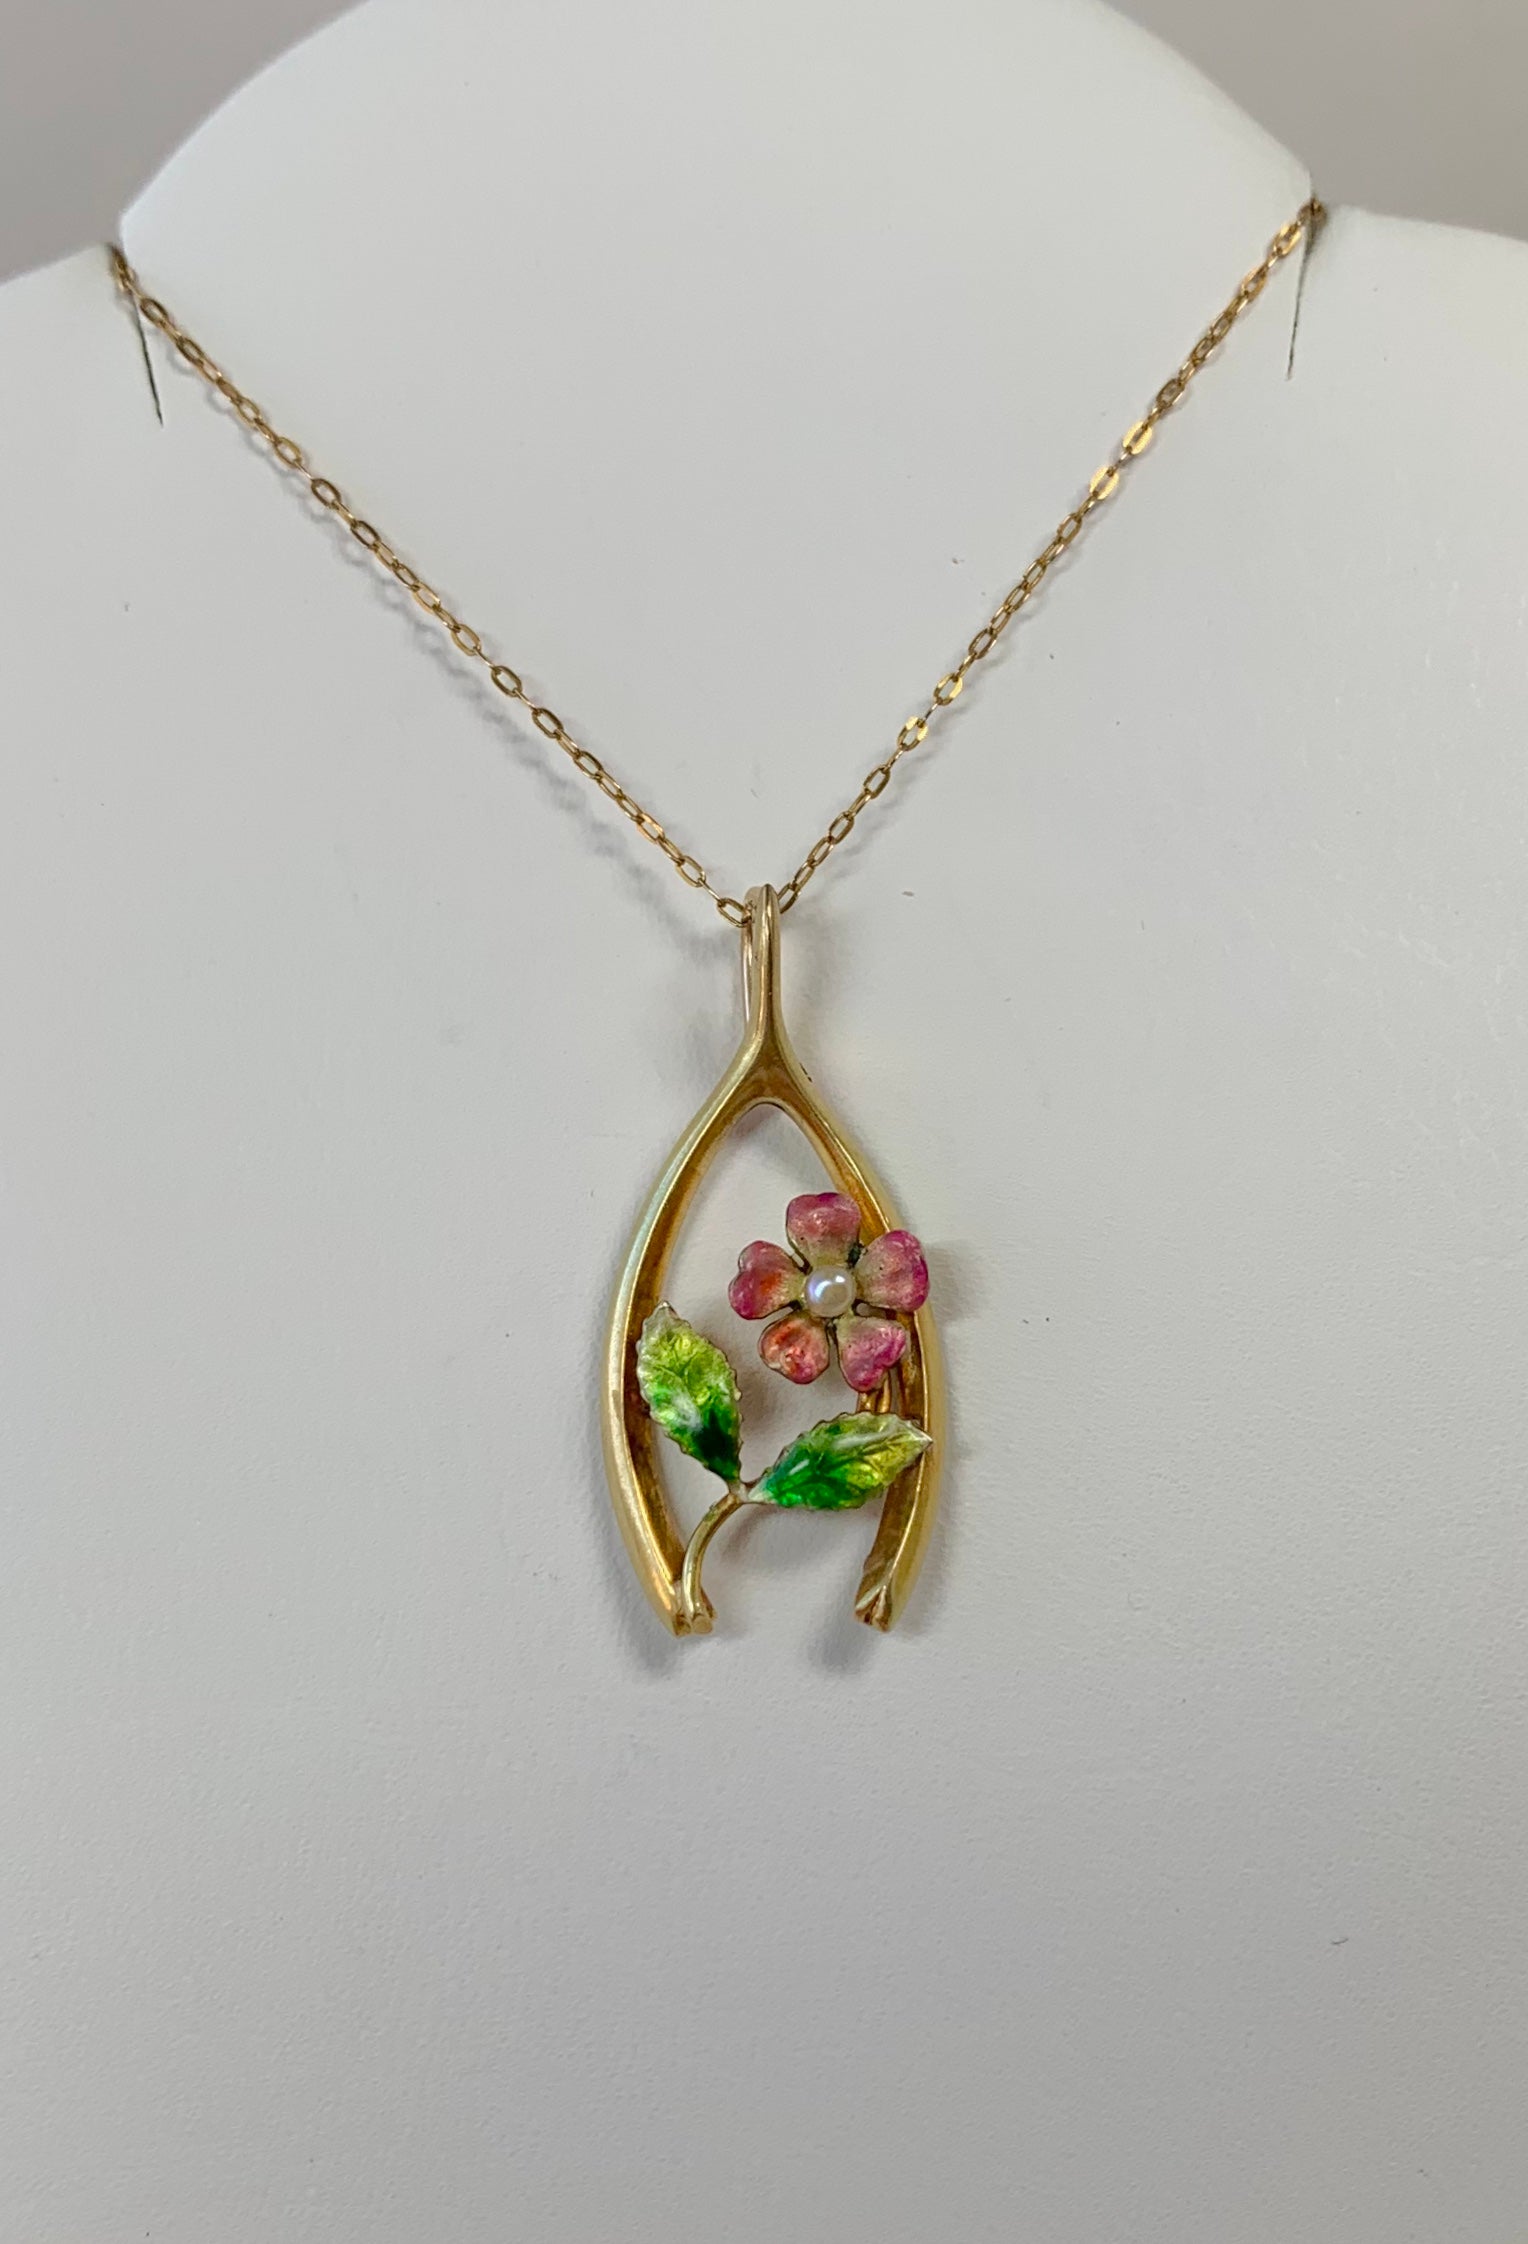 Victorian Enamel Forget Me Not Flower Pendant Necklace Horseshoe Wishbone Gold In Excellent Condition For Sale In New York, NY